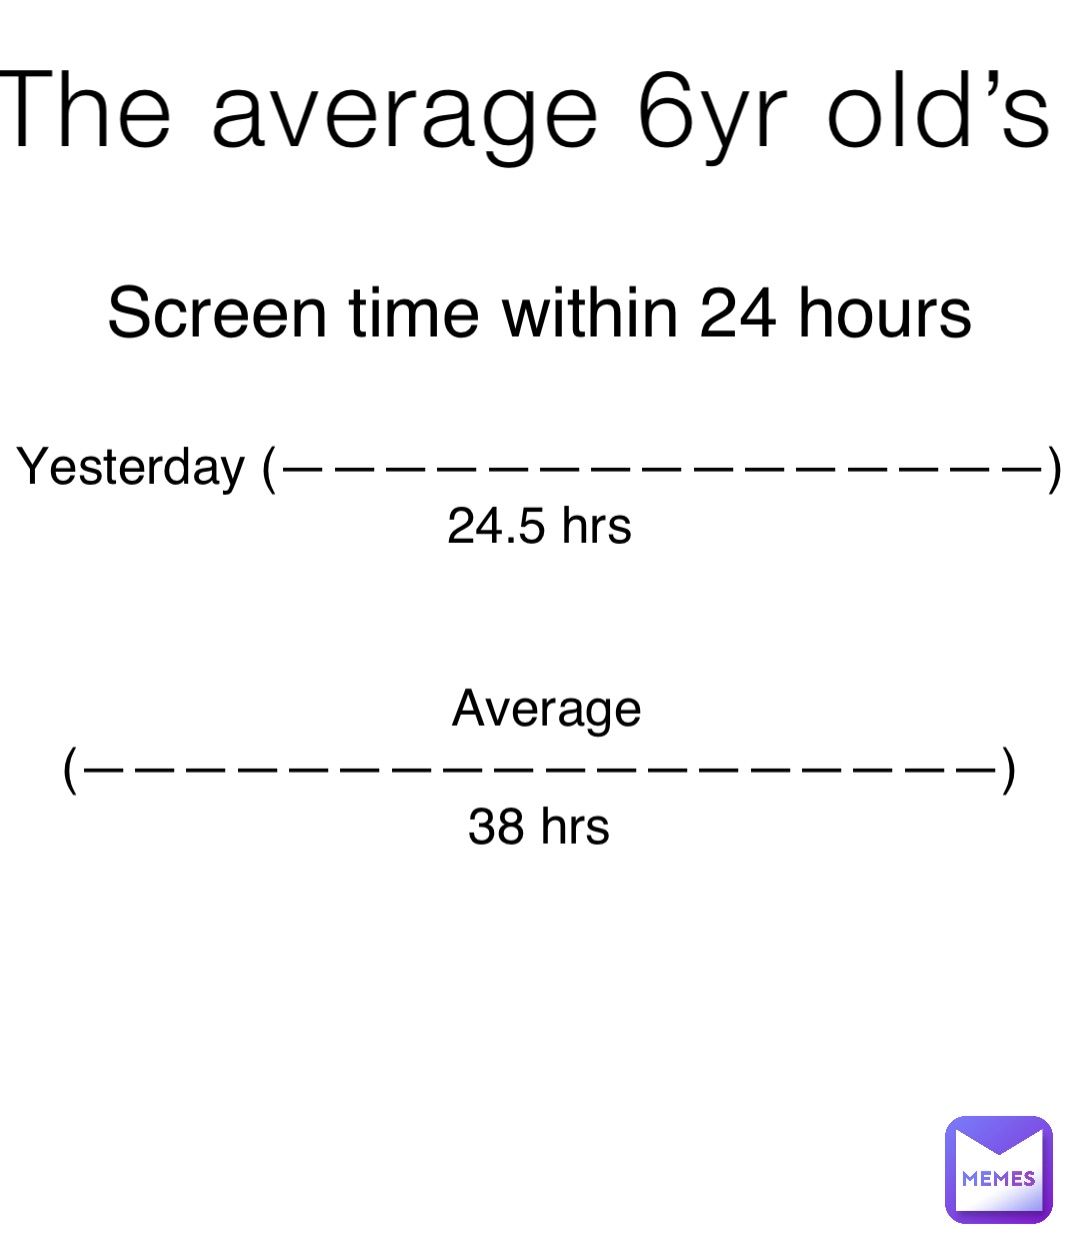 The average 6yr old’s Screen time within 24 hours Yesterday (———————————————)
24.5 hrs Average (——————————————————)
38 hrs